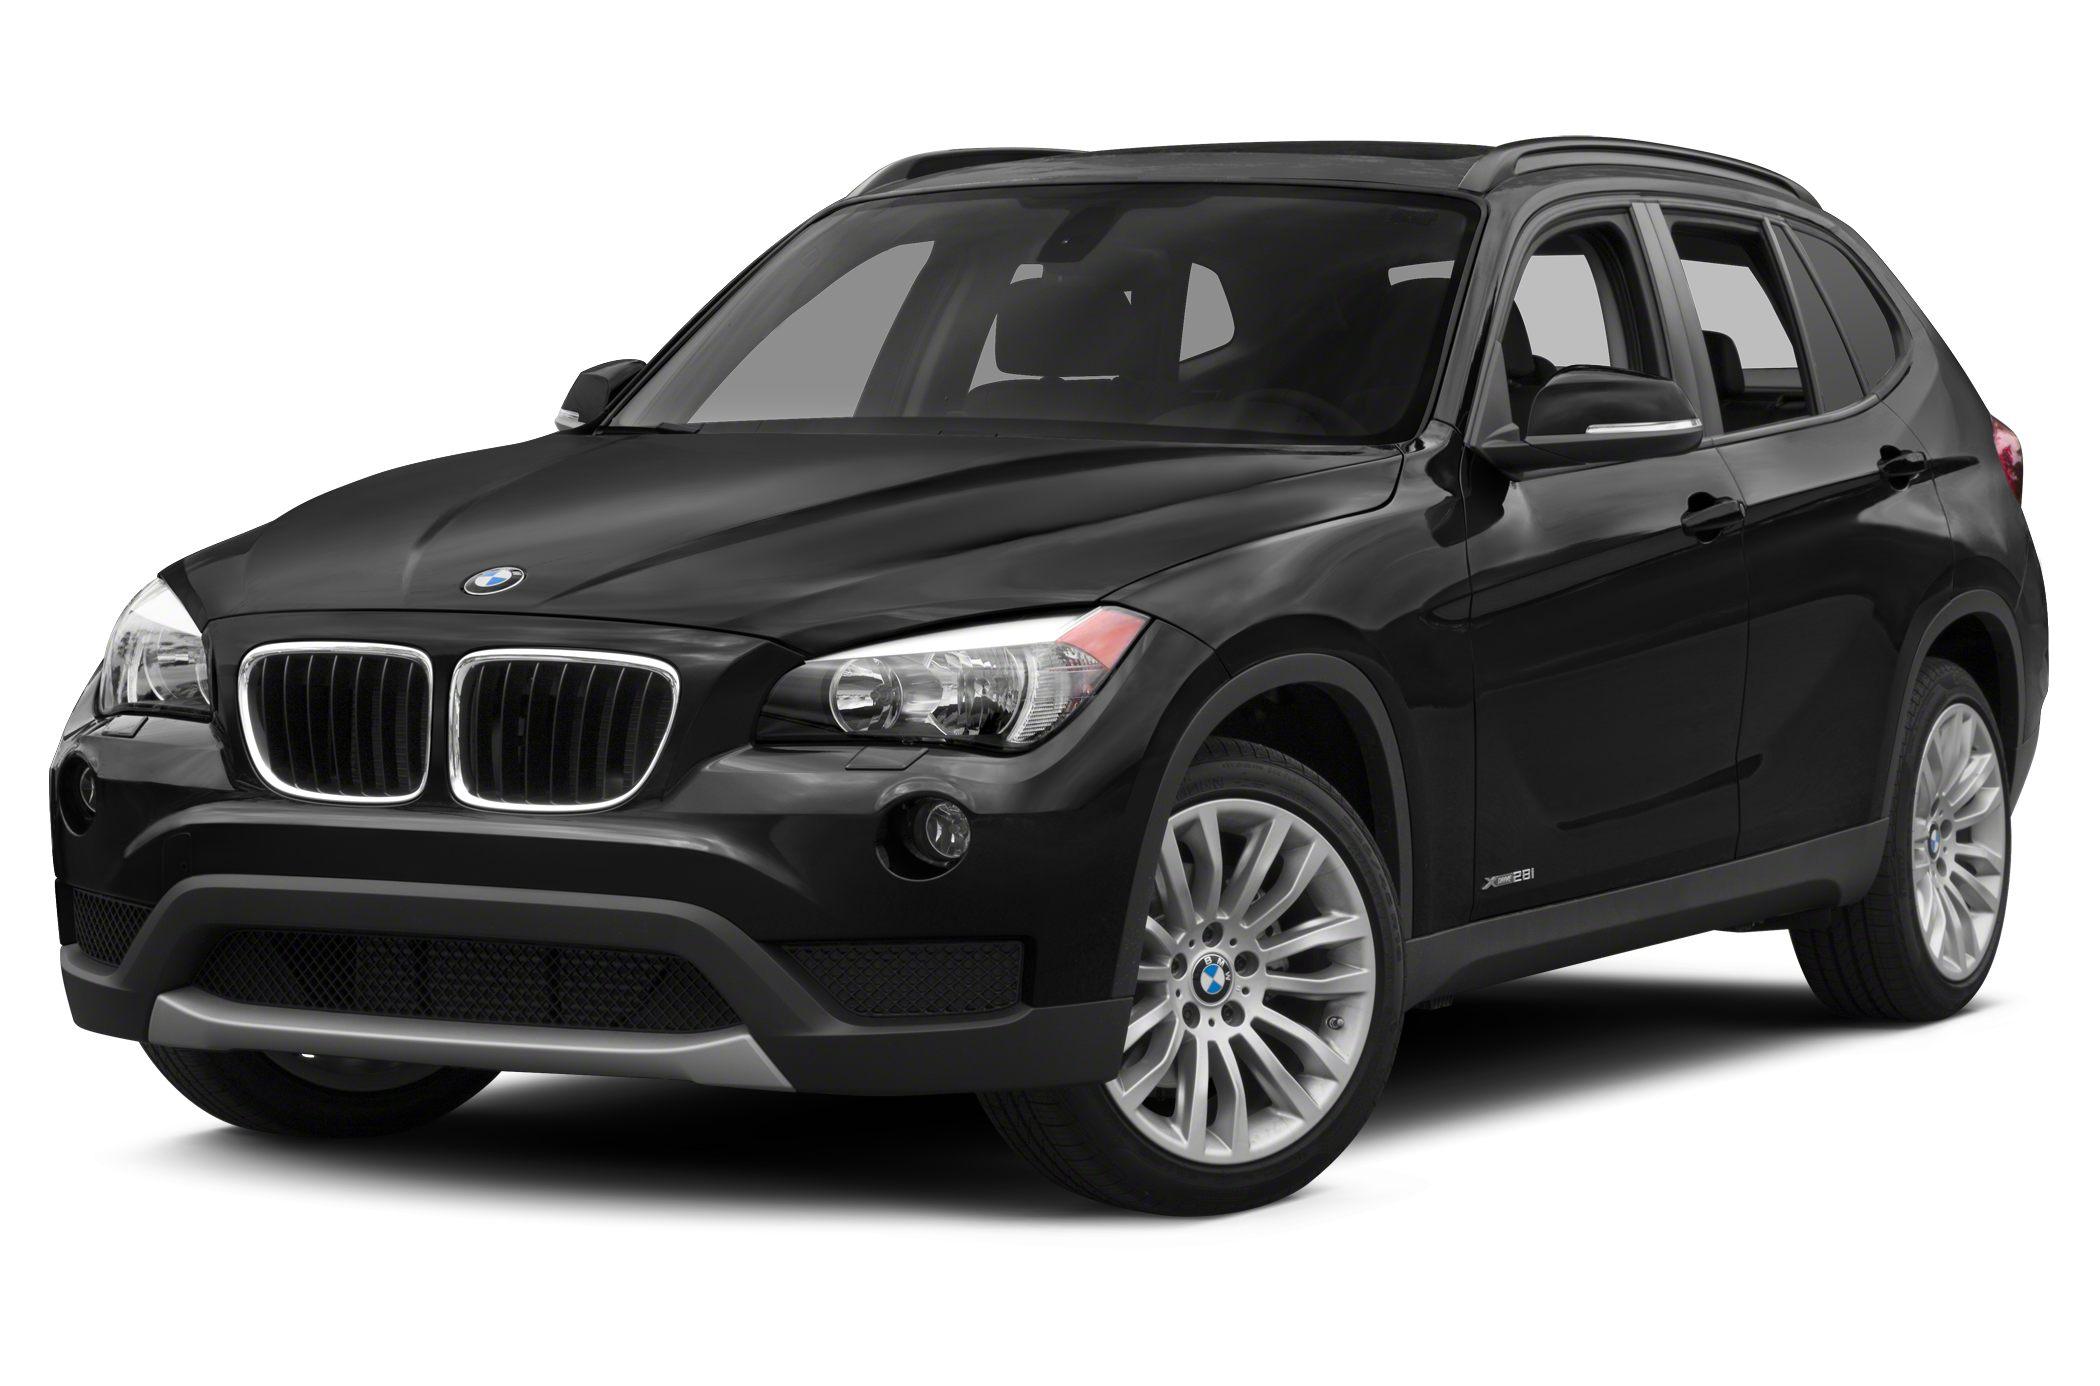 2015 BMW X1 Specs and Prices